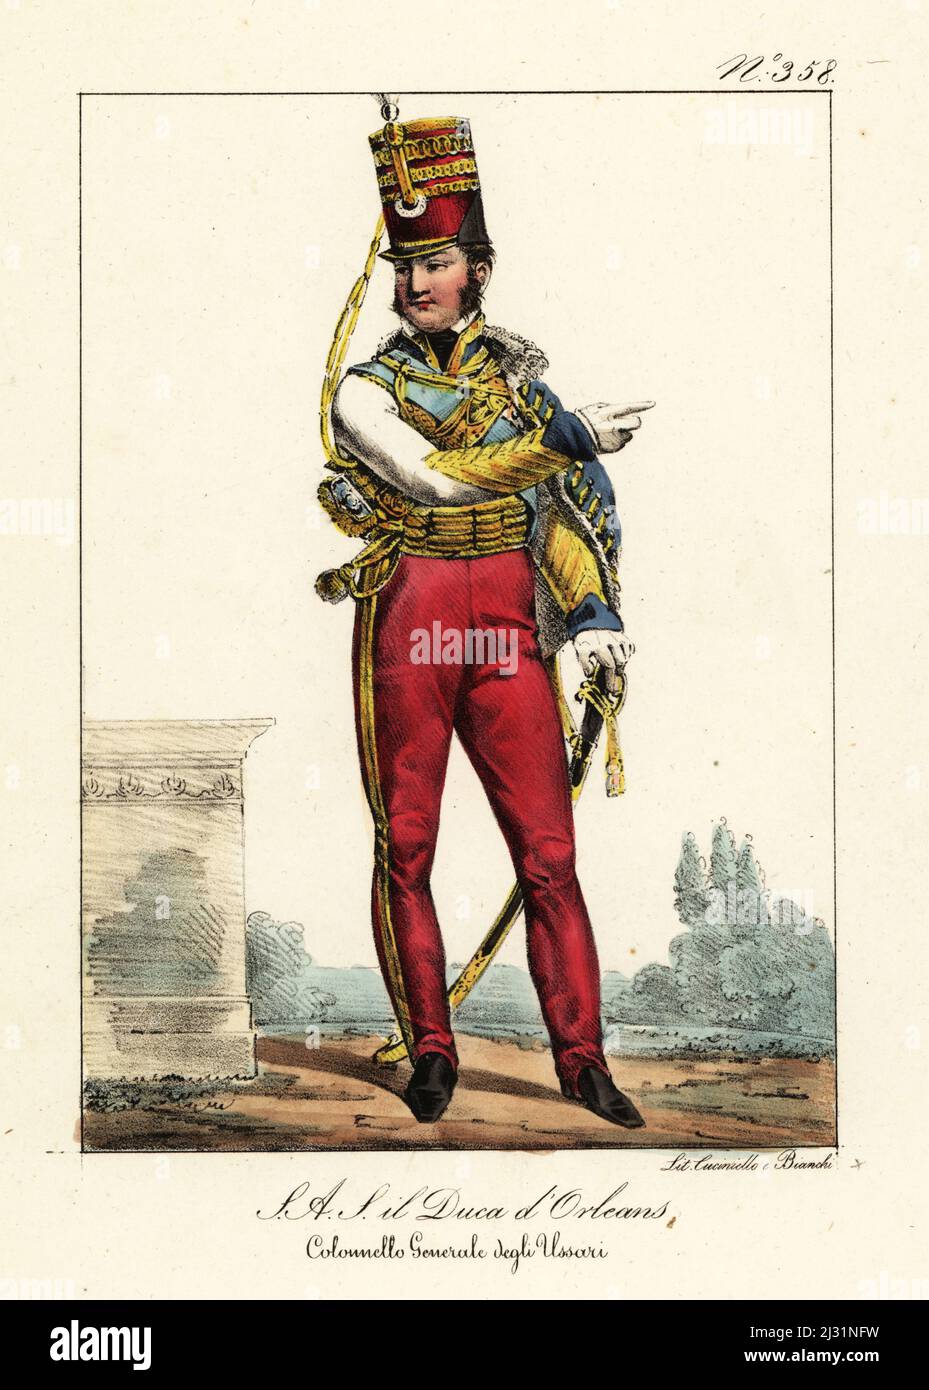 Louis Philippe, 1773-1850, King of the French from 1830 to 1848, last king and penultimate monarch of France. In uniform of a Colonel General in the Hussars. S.A.R. Monseigneur le Duc d'Orleans. Colonel General des Hussards. Handcoloured lithograph by Lorenzo Bianchi and Domenico Cuciniello after Hippolyte Lecomte from Costumi civili e militari della monarchia francese dal 1200 al 1820, Naples, 1825. Italian edition of Lecomte’s Civilian and military costumes of the French monarchy from 1200 to 1820. Stock Photo